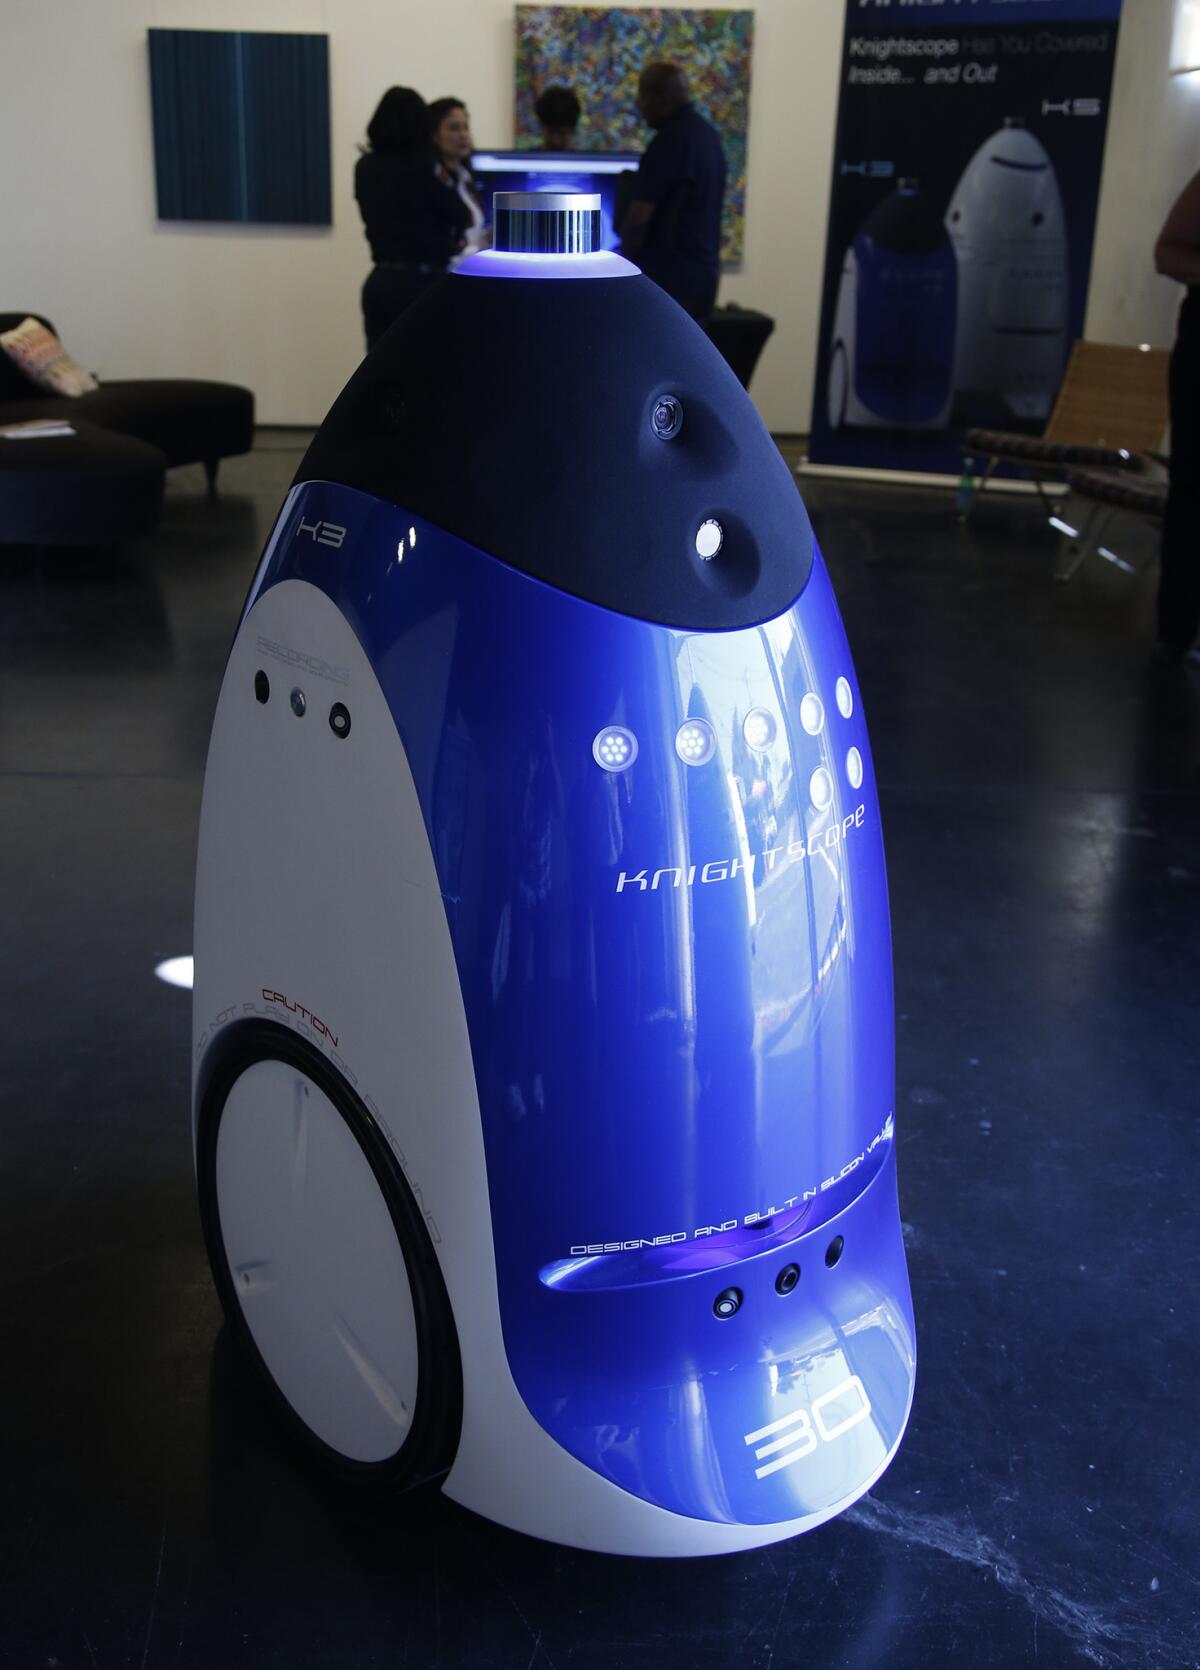 Knightscope hopes to roll out 50 to 100 robots by the end of the year.